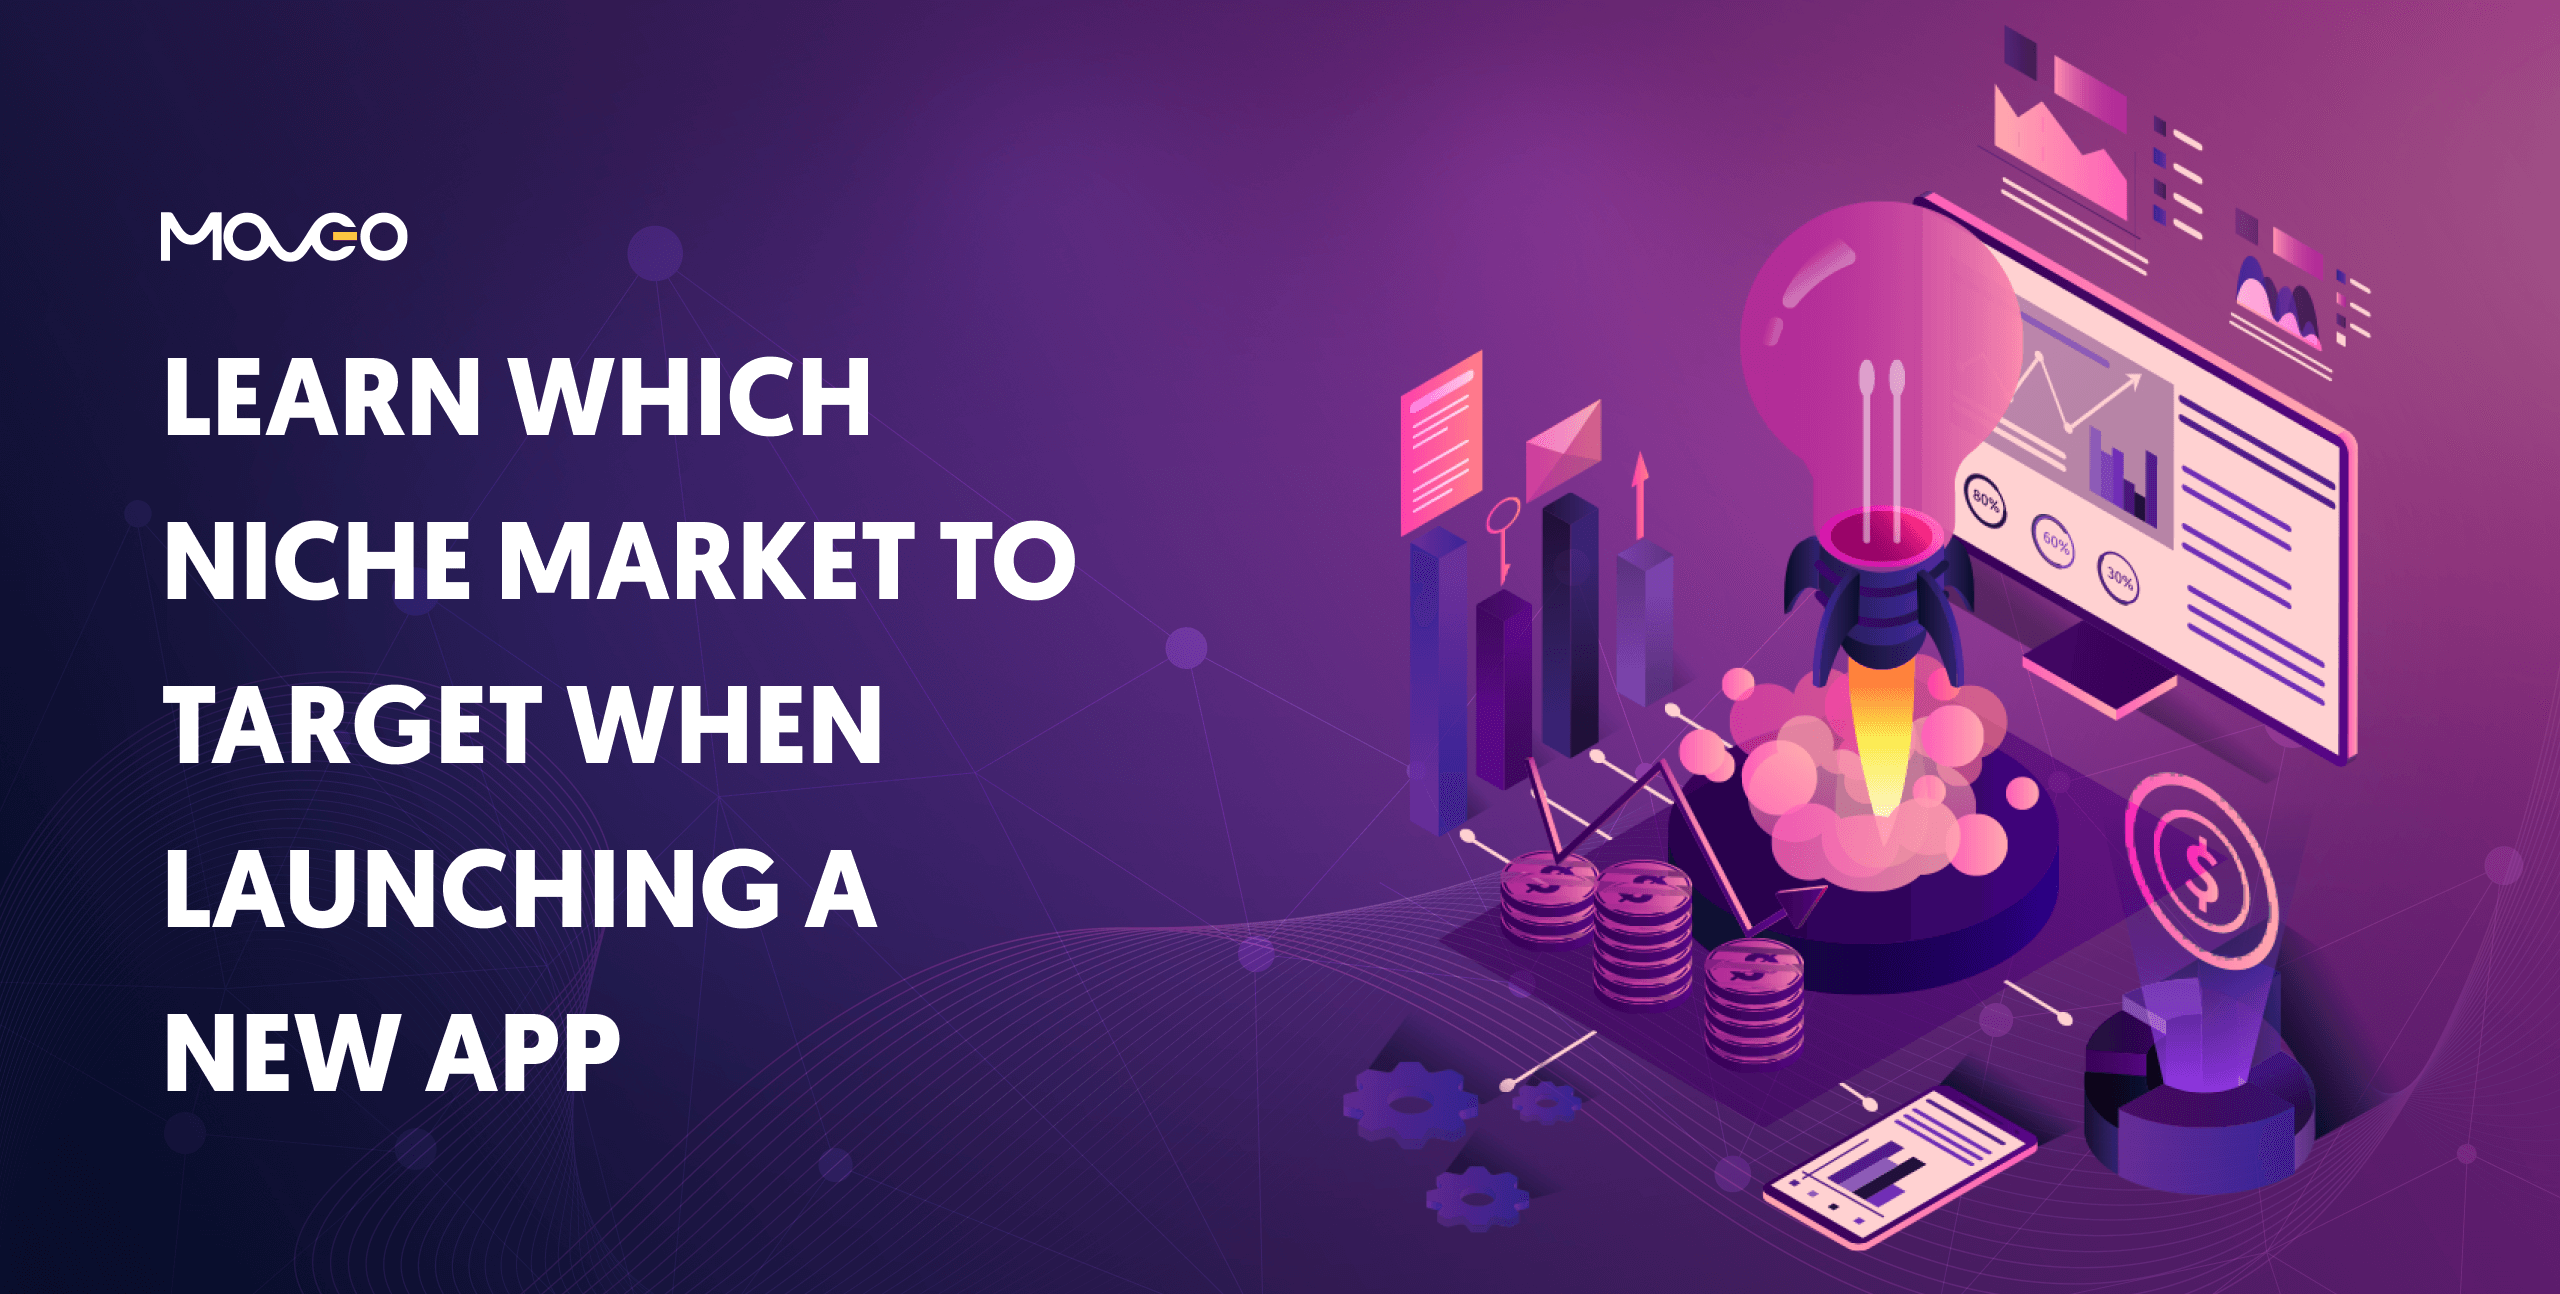 learn which niche market to target when launching a new app